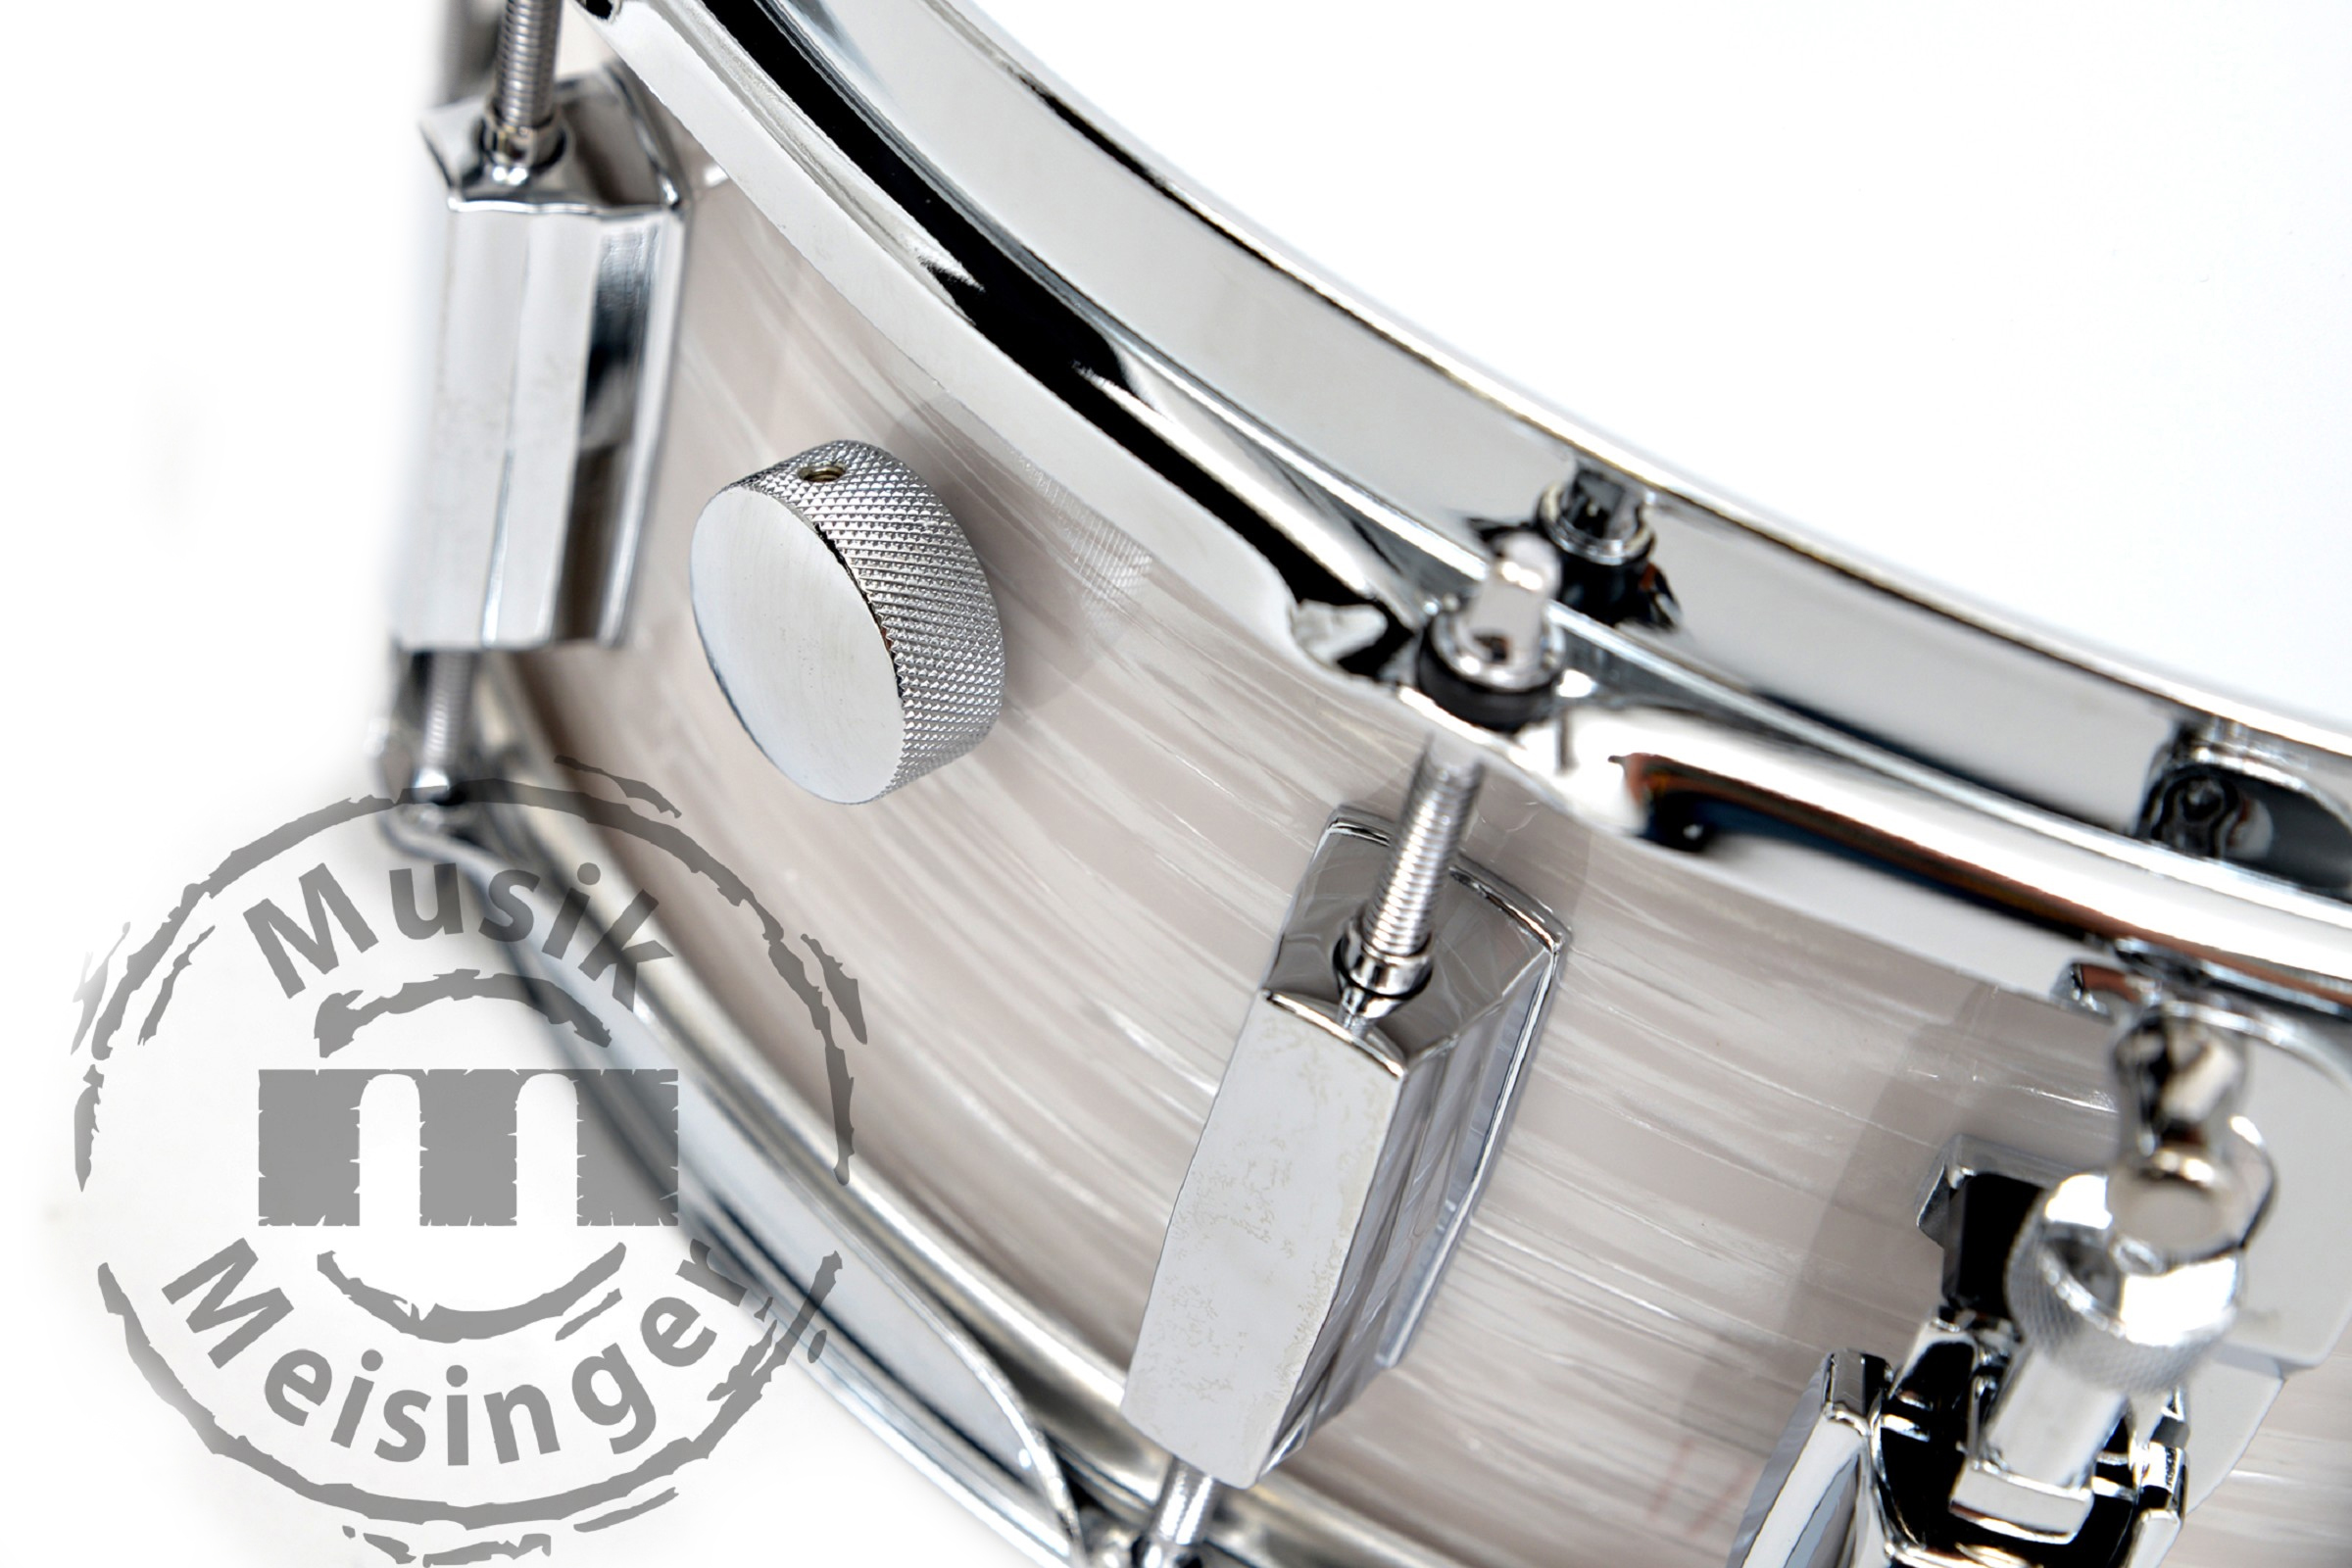 Pearl President Phenolic 14x5,5 Snare Pearl White Oyster